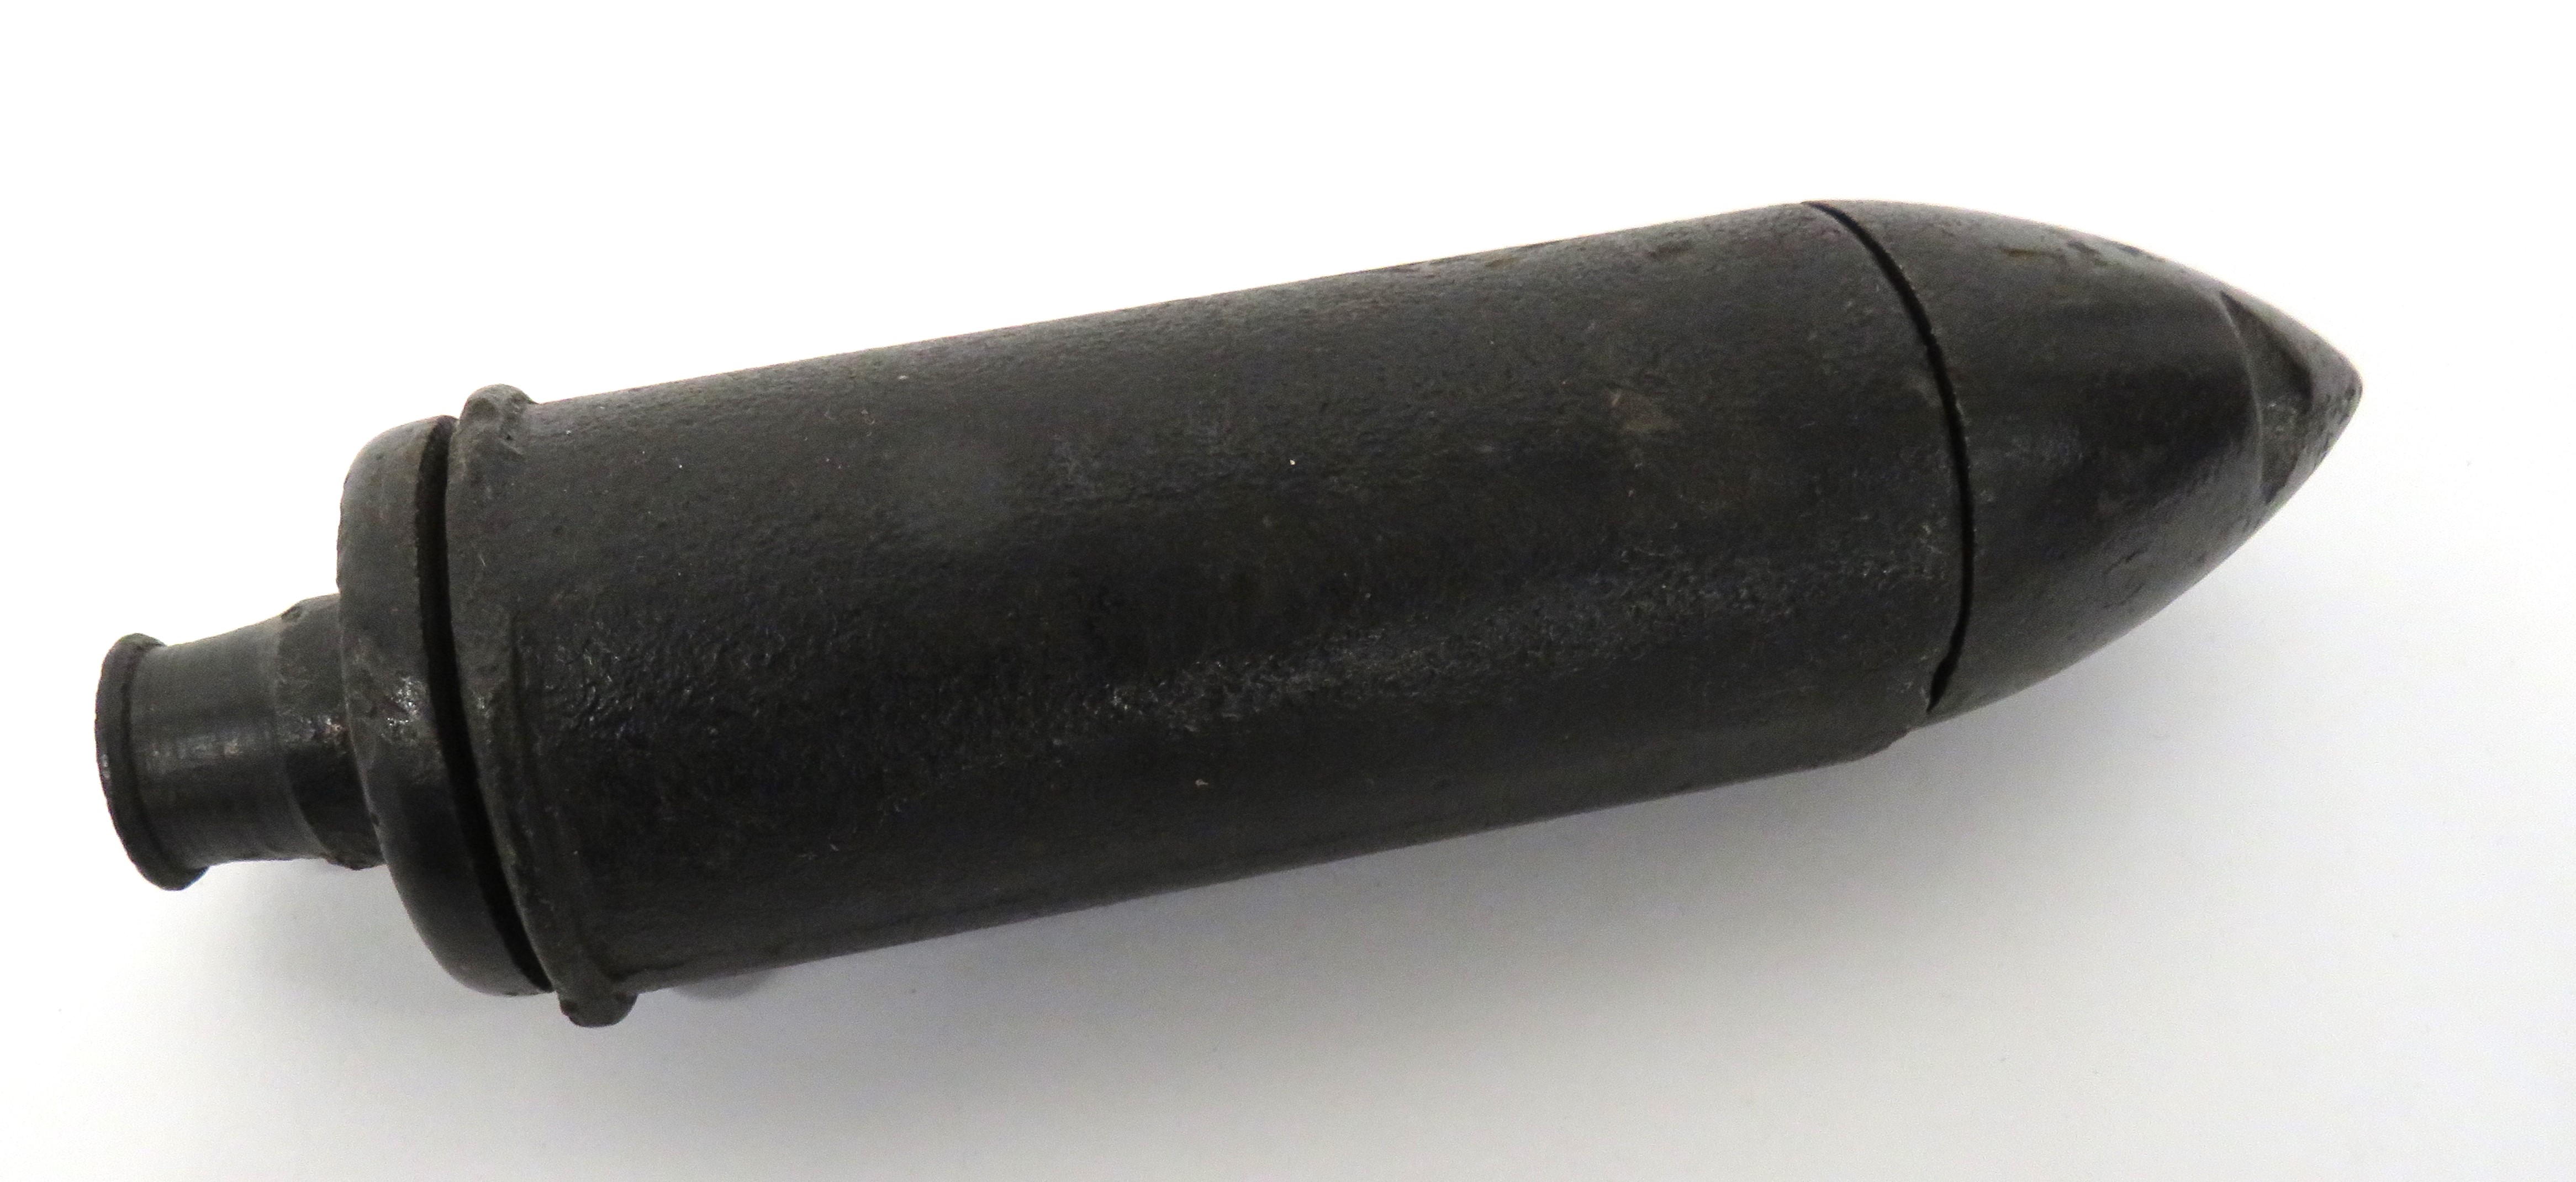 Scarce WW1 Austrian Inert M1913 Rifle Rod Grenade cast iron, canister body.  Removable top pointed